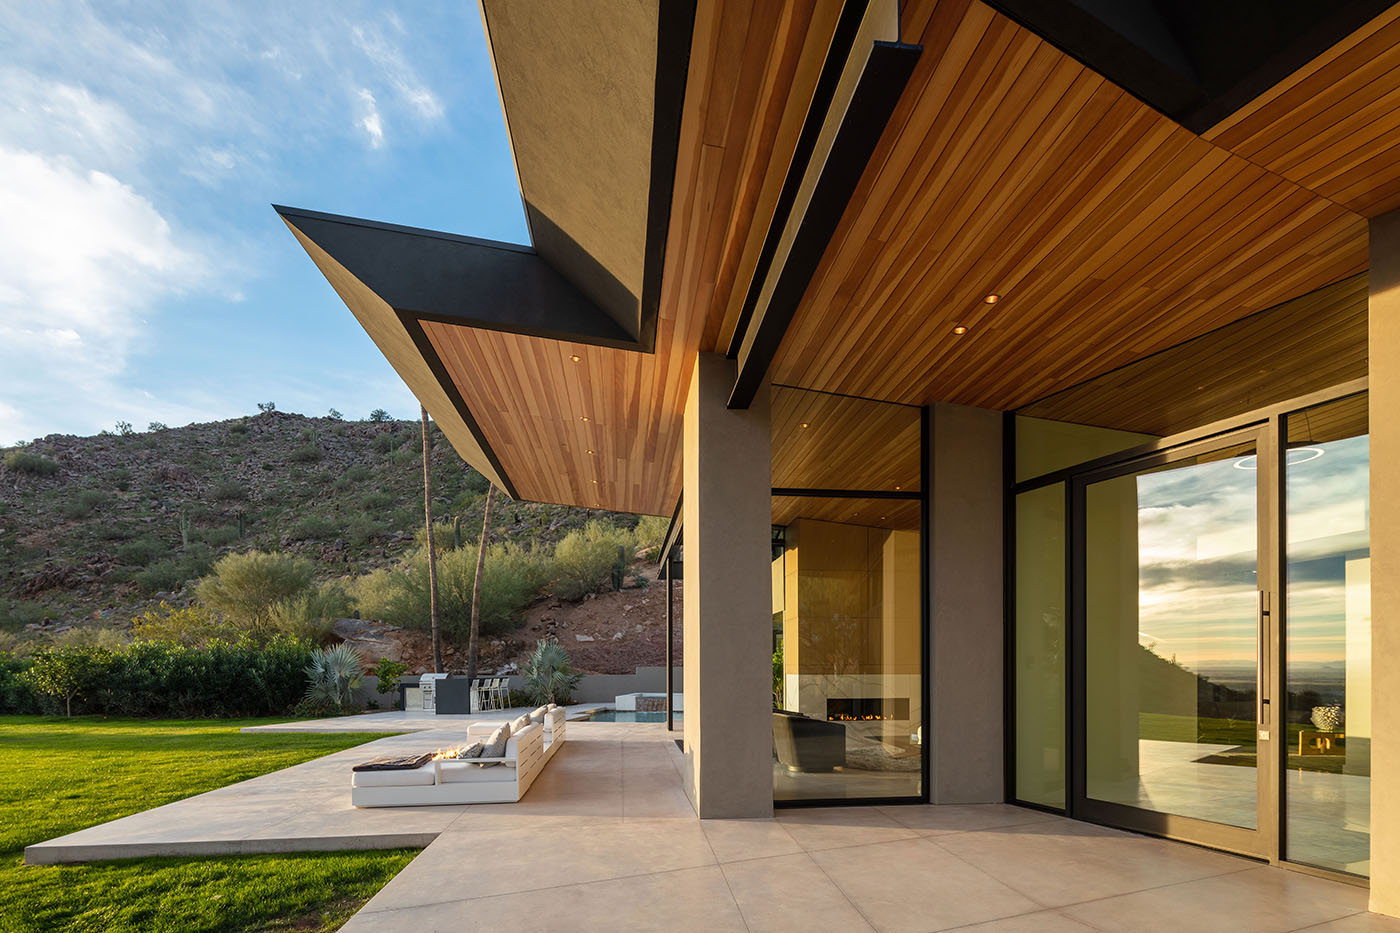 Cholla Vista: A monumental canopy with angled ceilings overlooking Paradise Valley